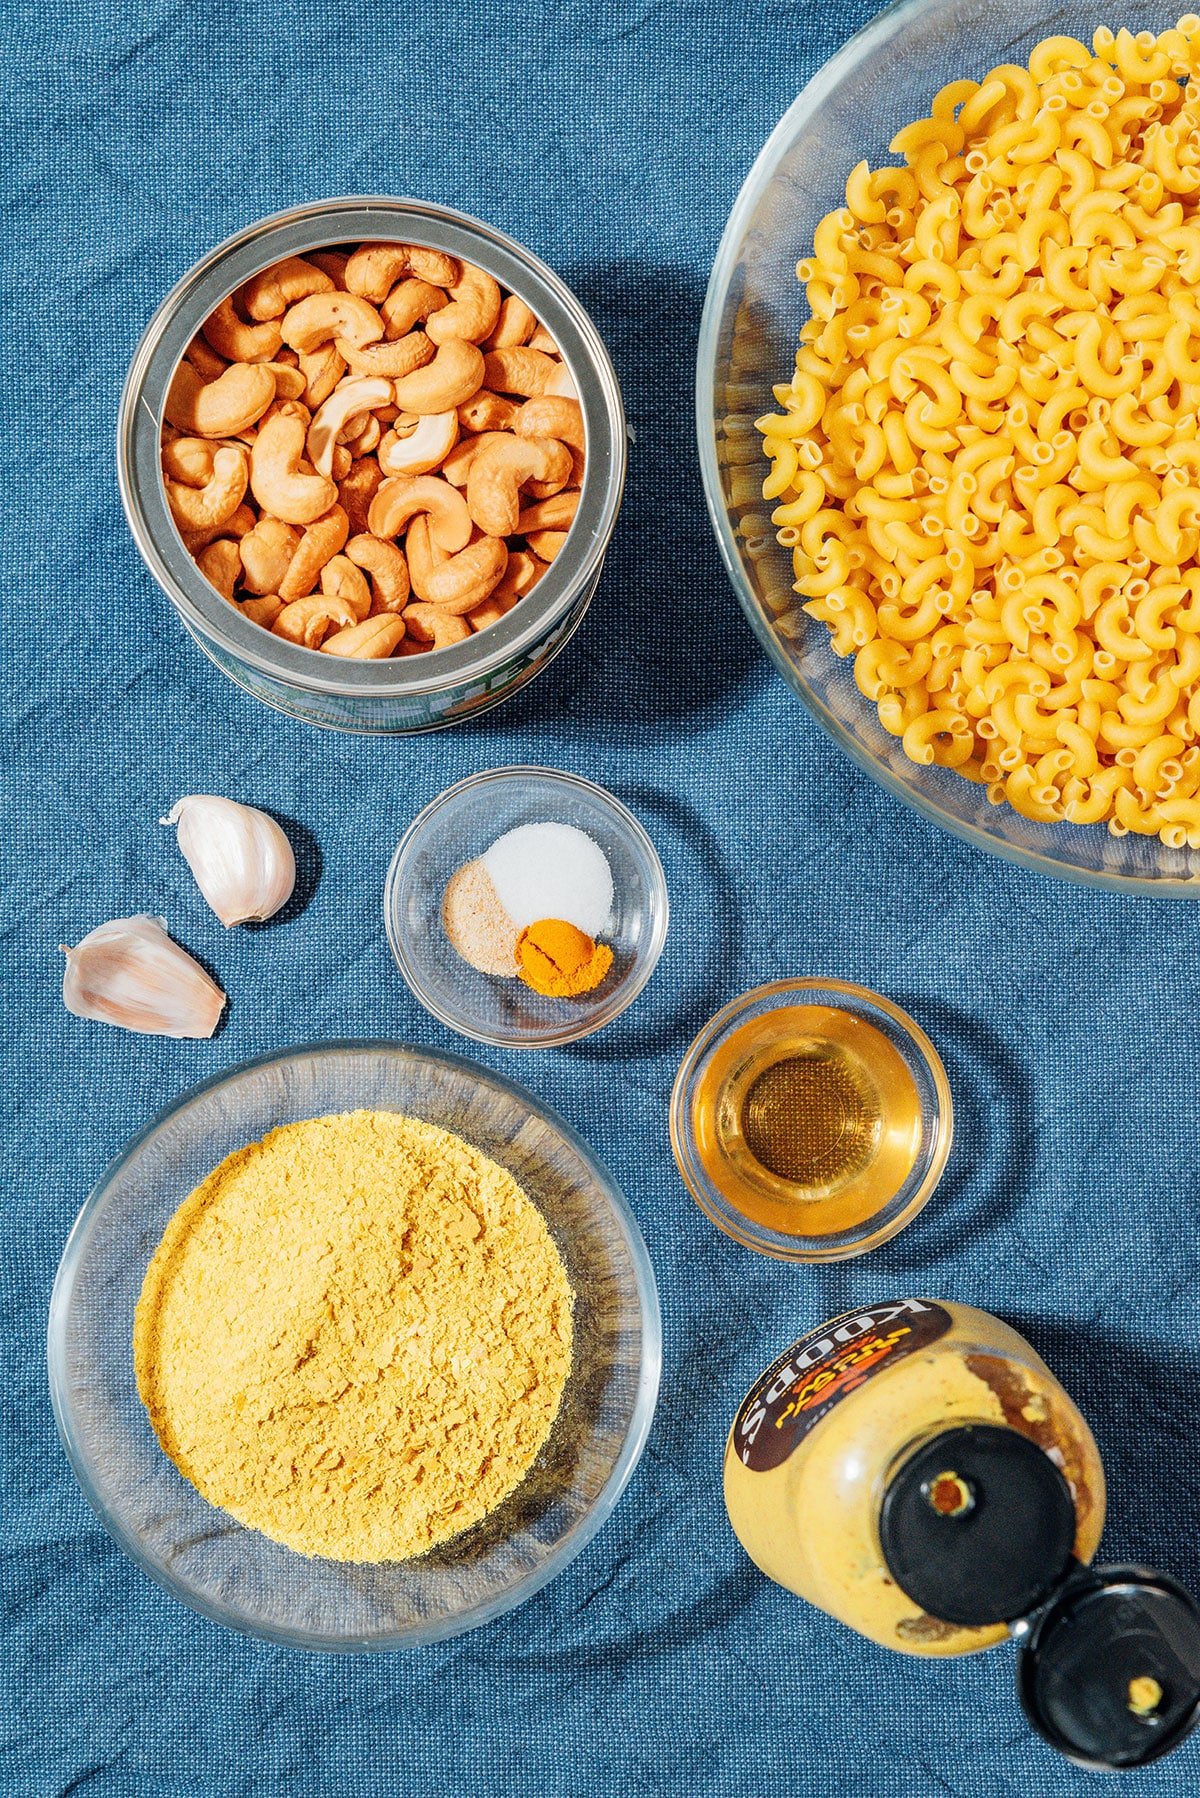 Ingredients for vegan mac and cheese.